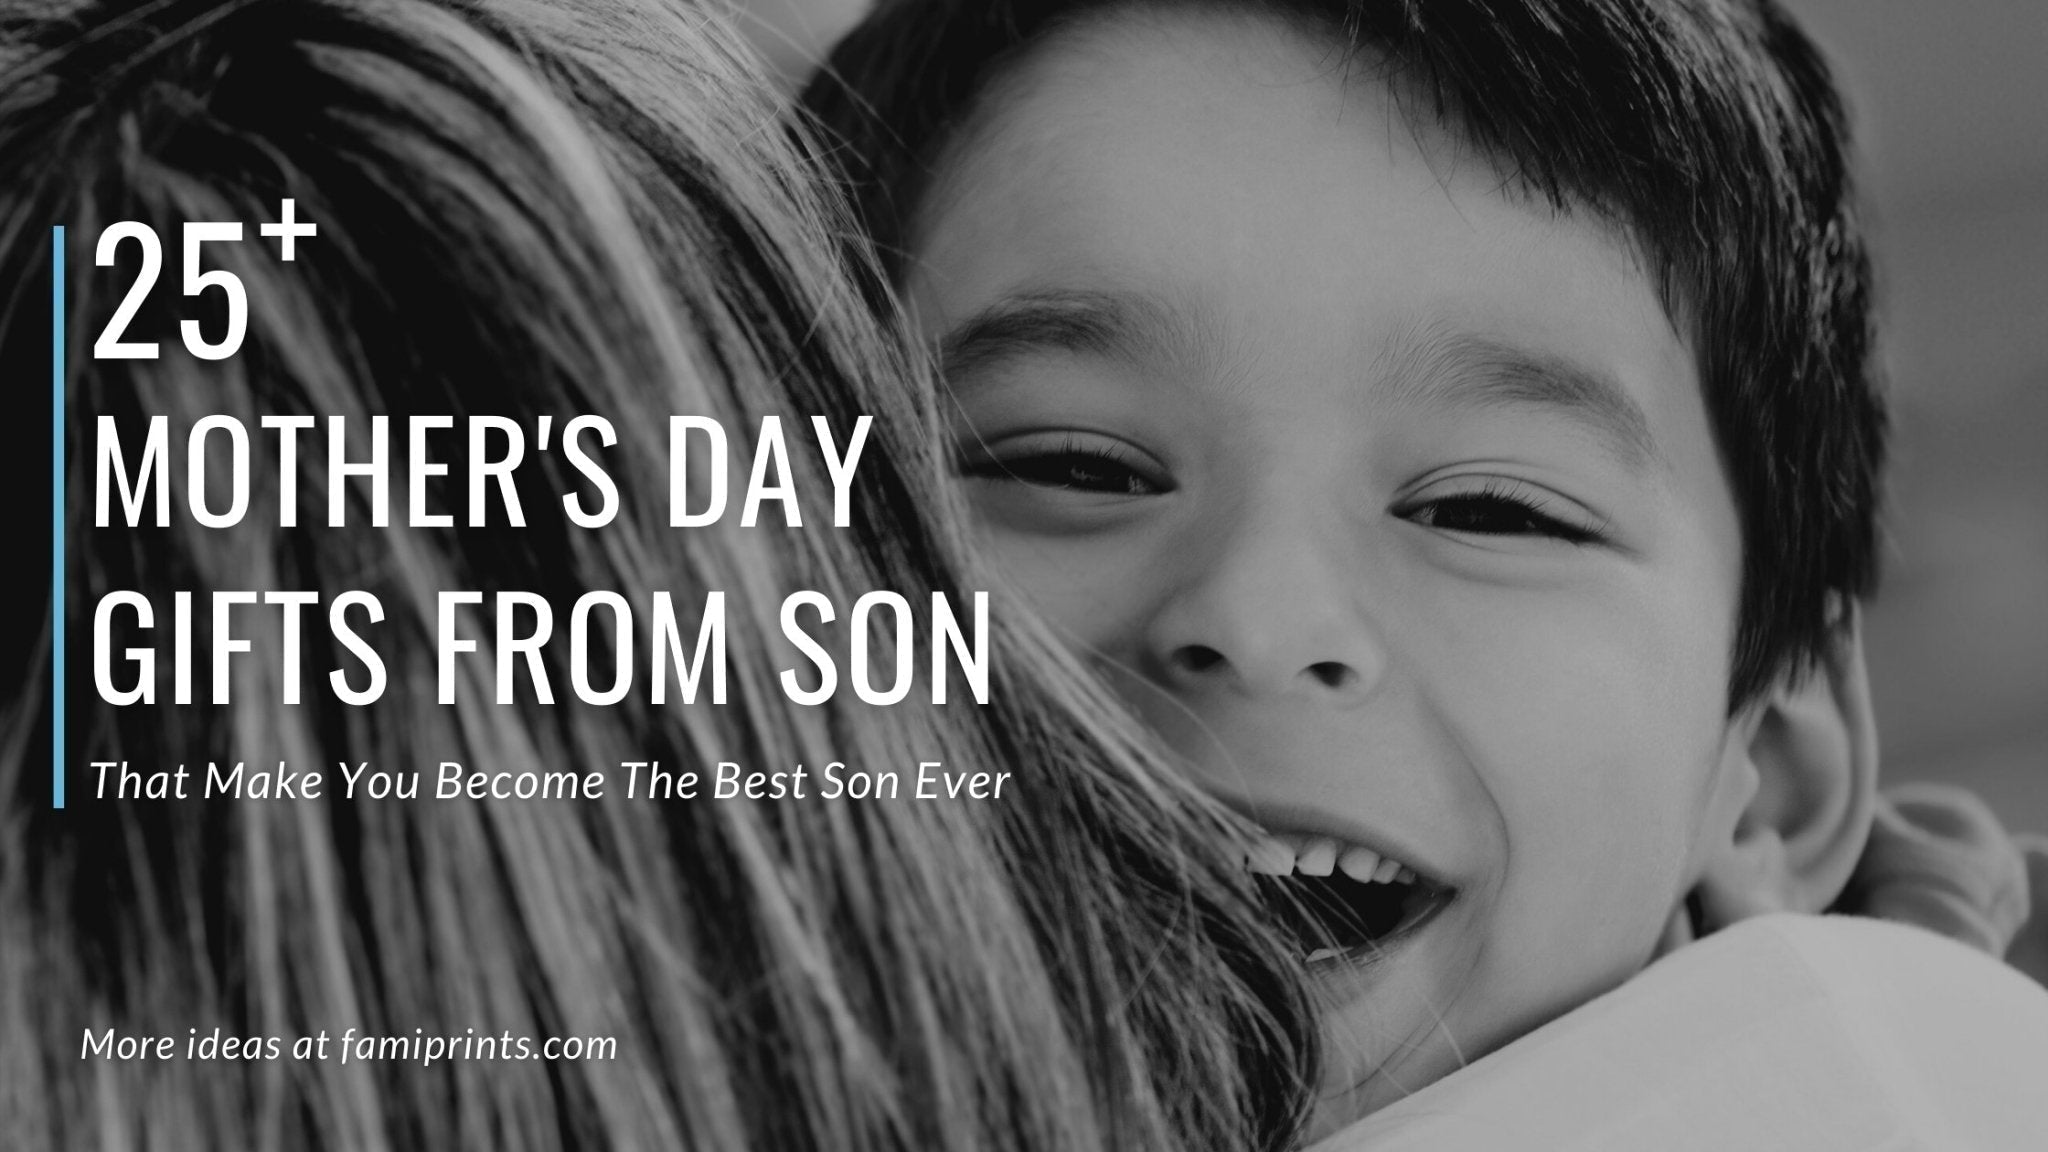 http://famiprints.com/cdn/shop/articles/25-best-mothers-day-gifts-from-son-that-make-you-become-the-best-son-ever-2022-515153.jpg?v=1659863414